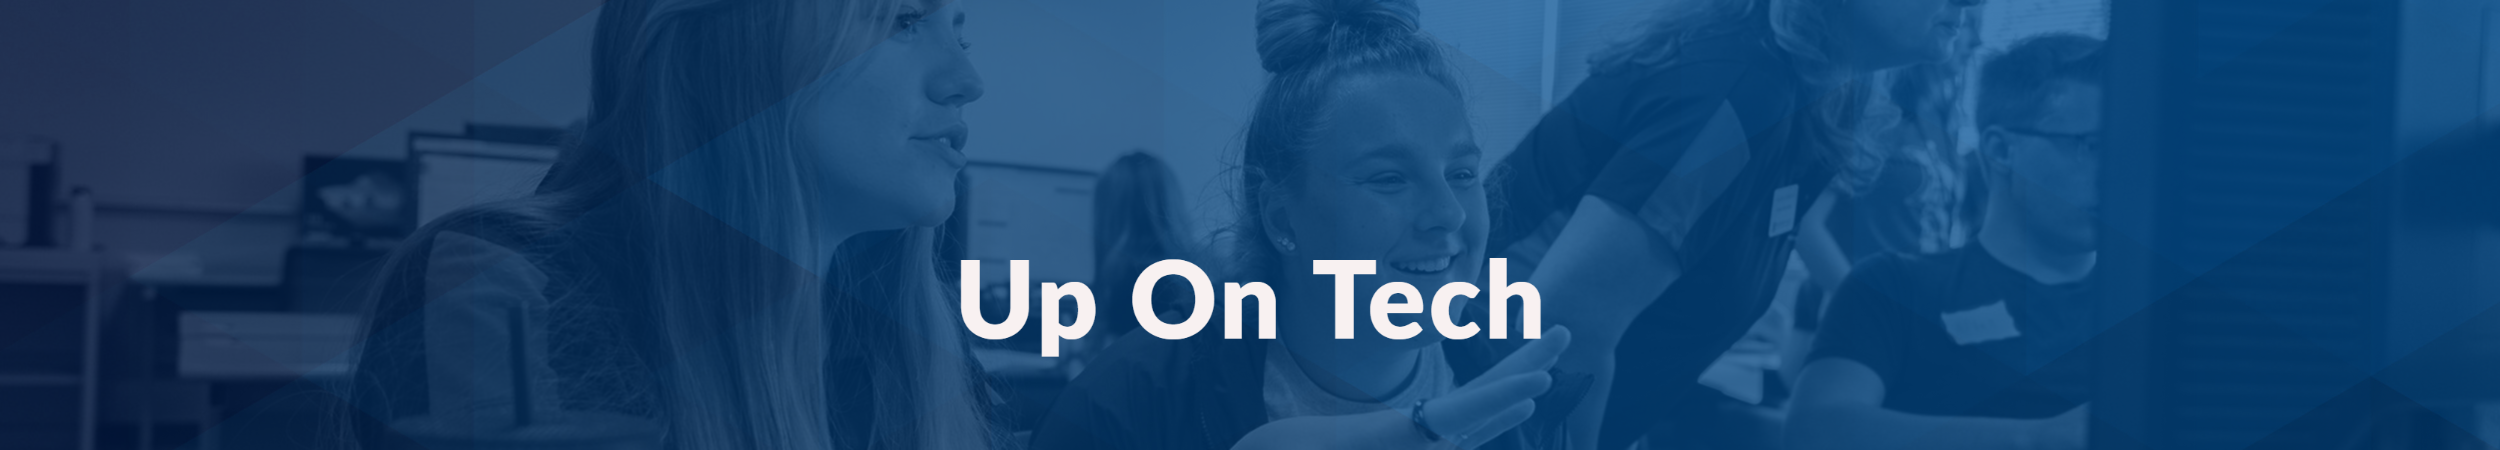 UpOnTech banner with students at a computer